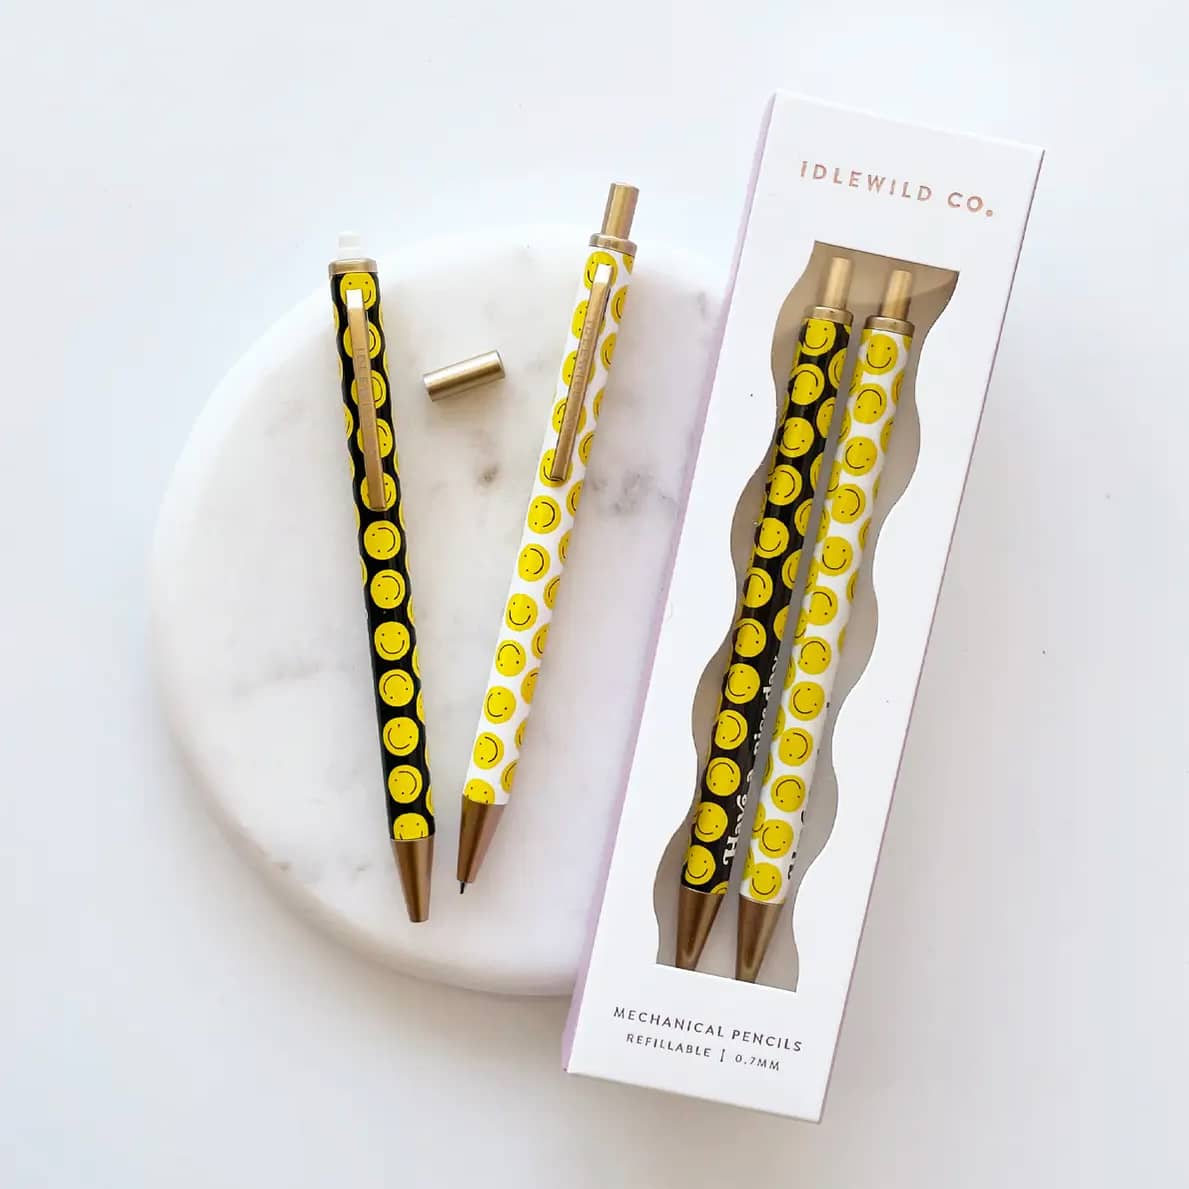 Mechanical Pencil Packs by Idlewild Co.